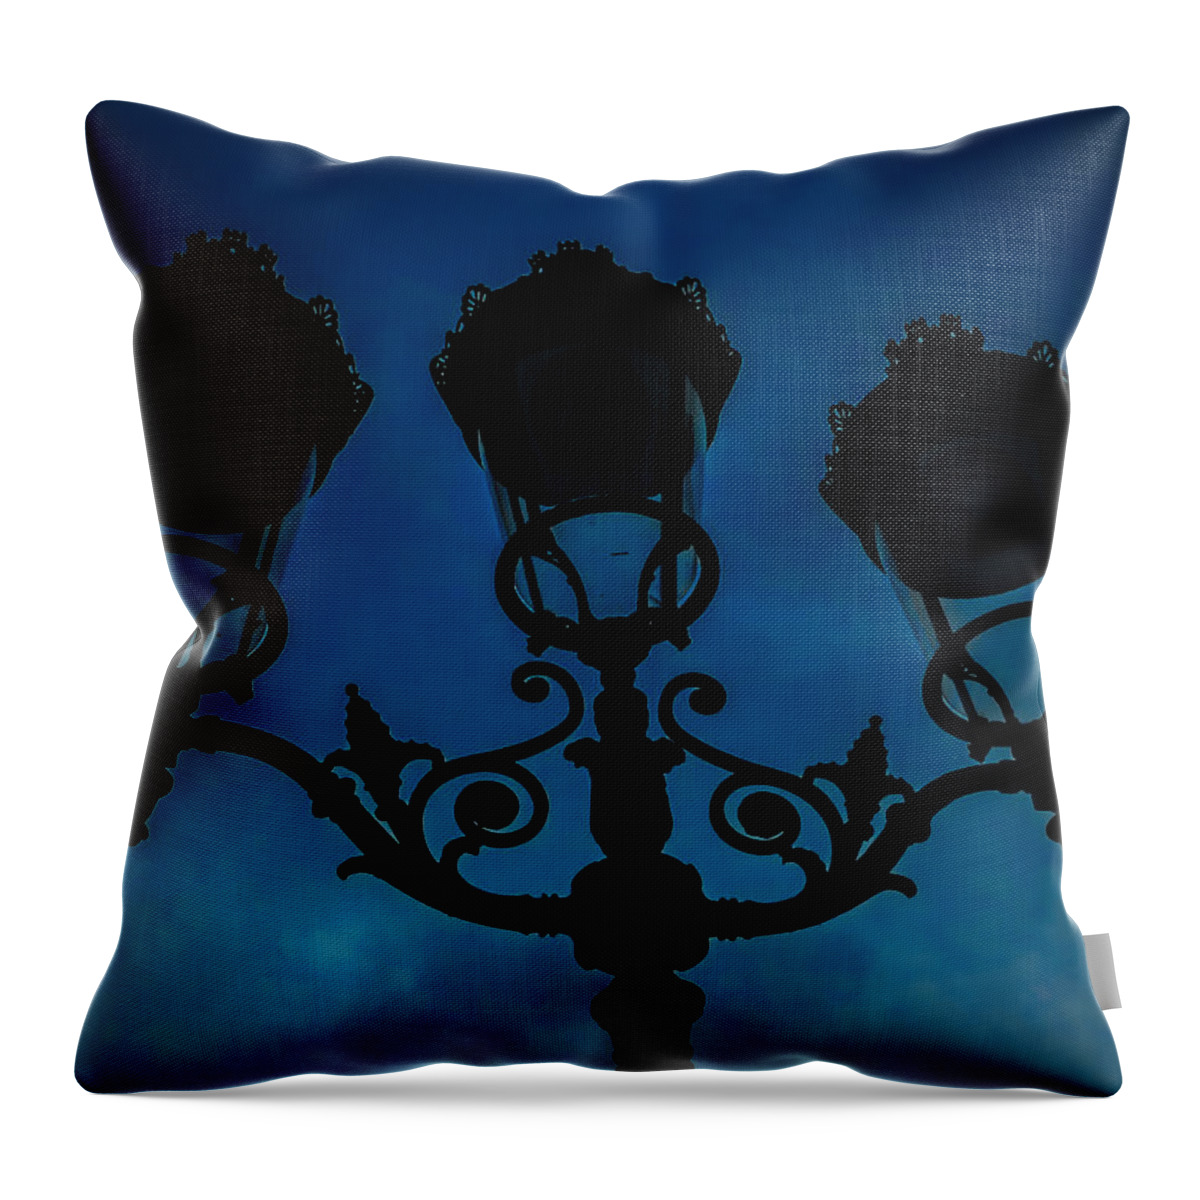 Lanterns Throw Pillow featuring the photograph Notre Dame Lanterns by Pamela Newcomb